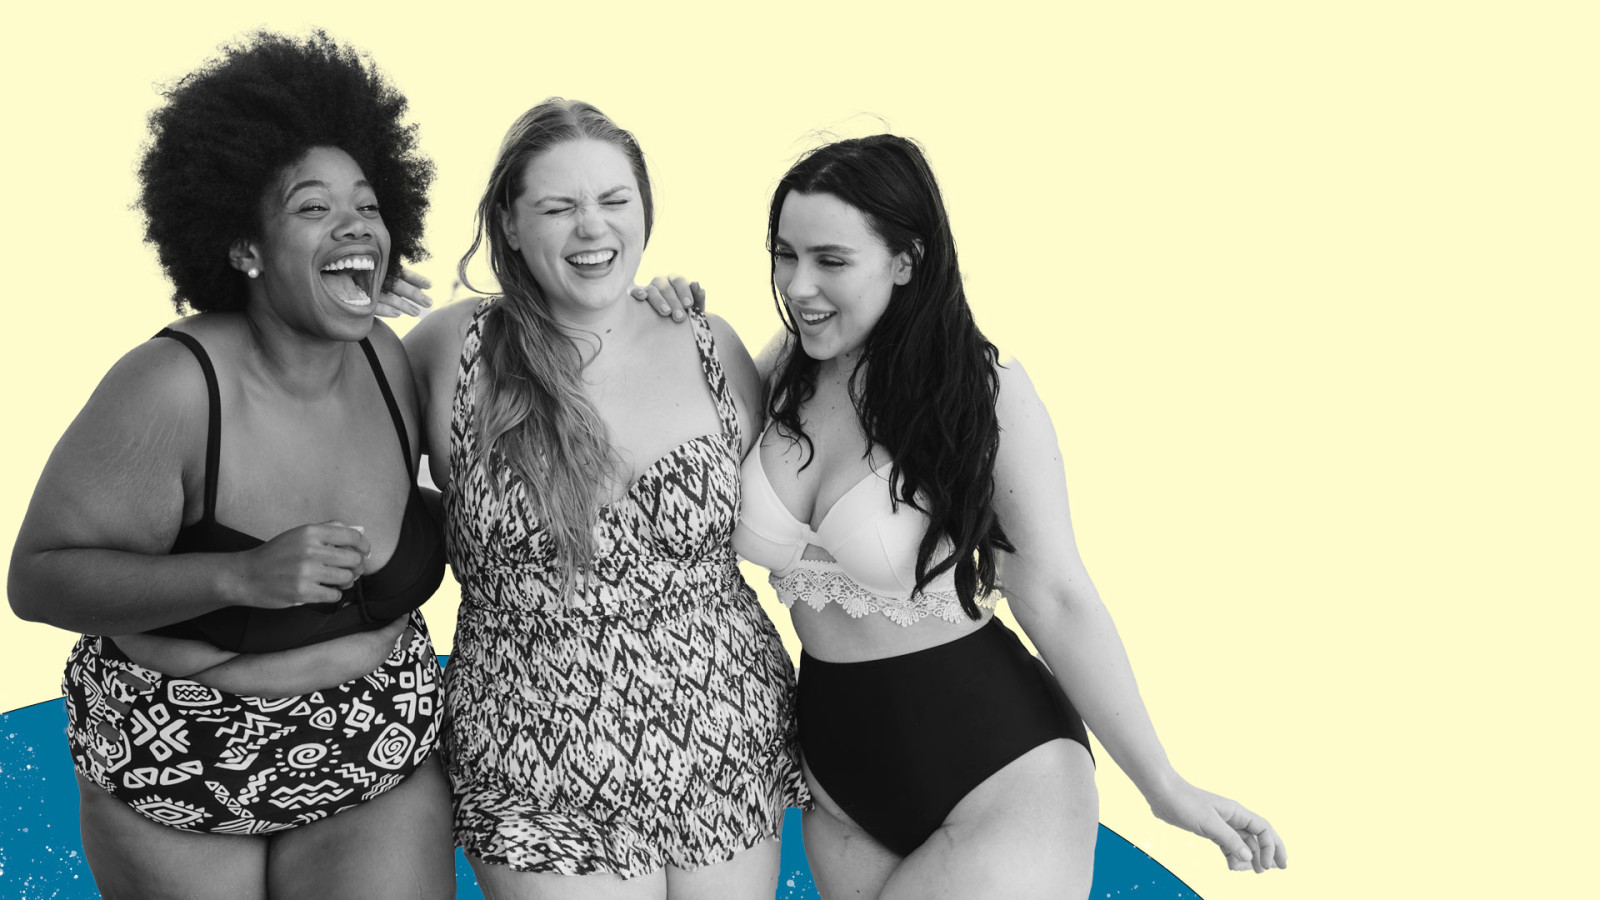 Collage style image. Smiling plus-sized women in swimwear.